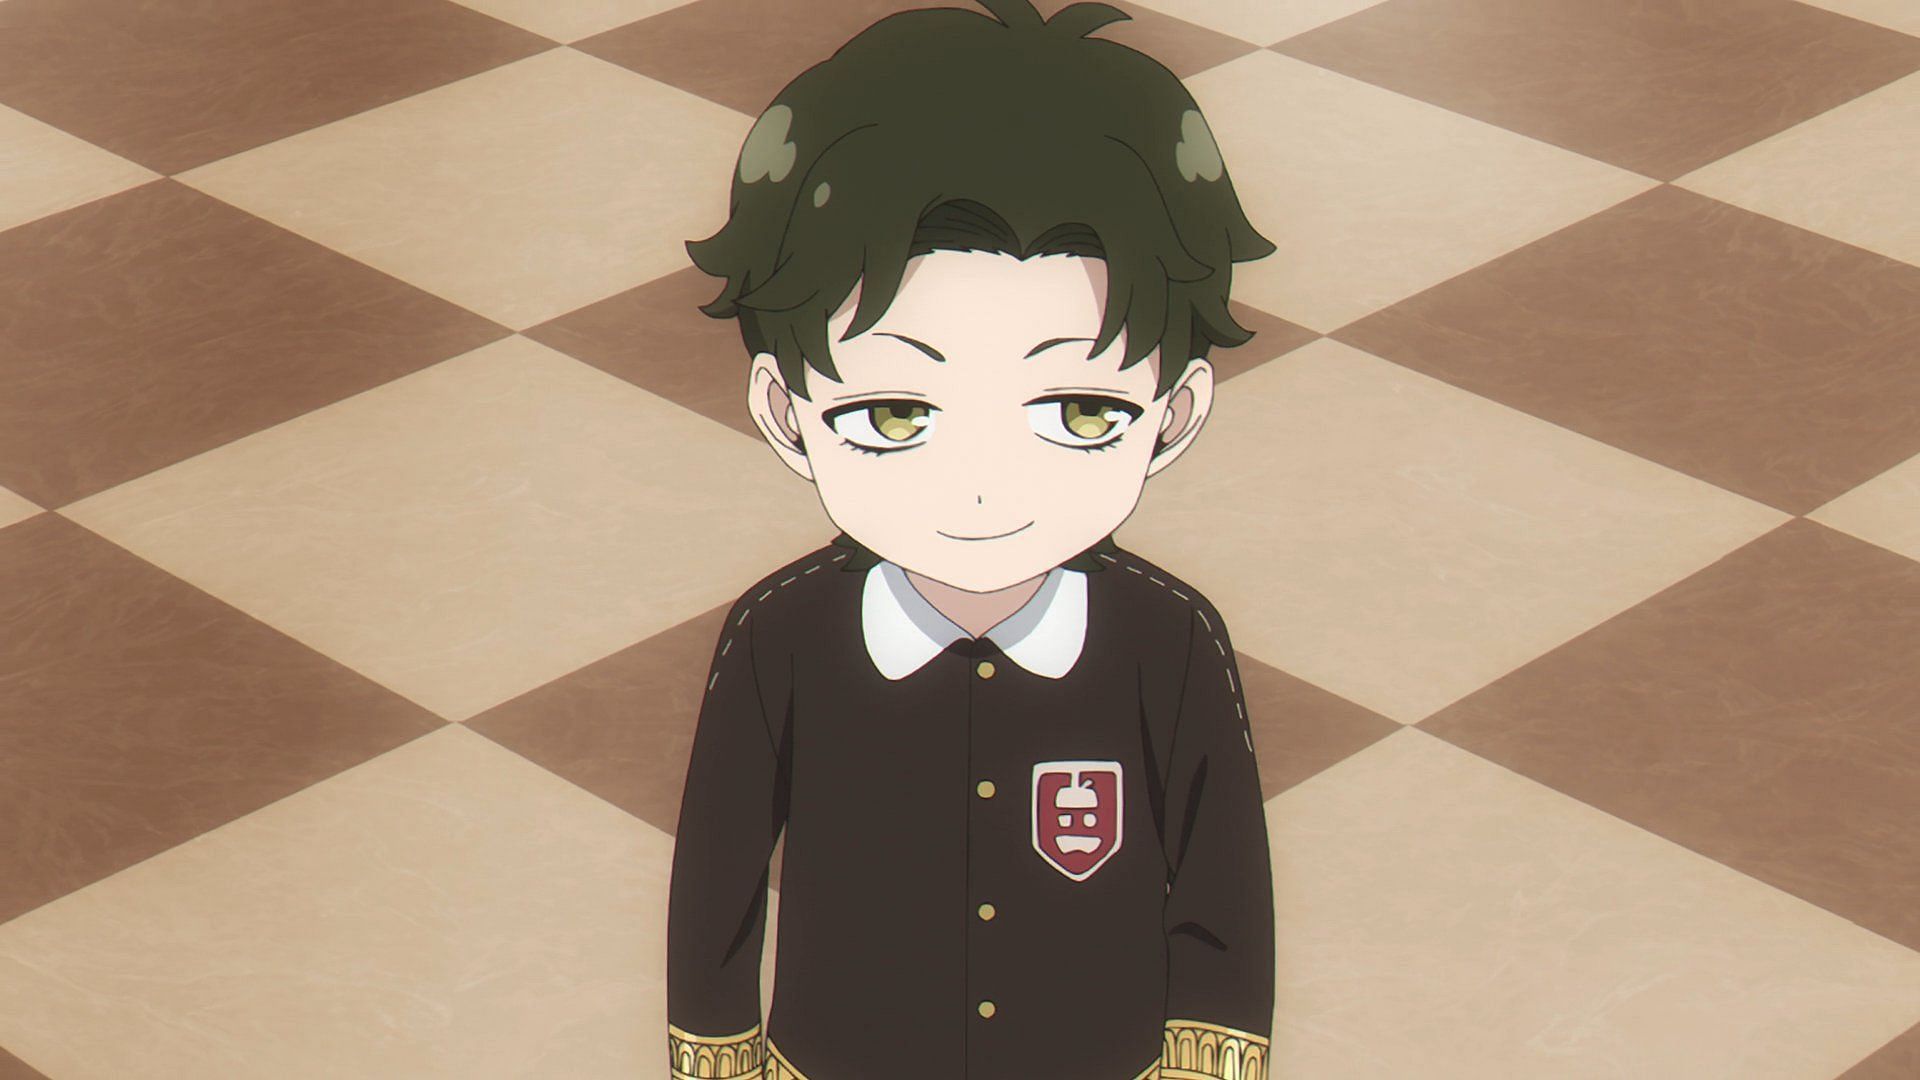 Damian as seen in the show (Image via Wit Studio)